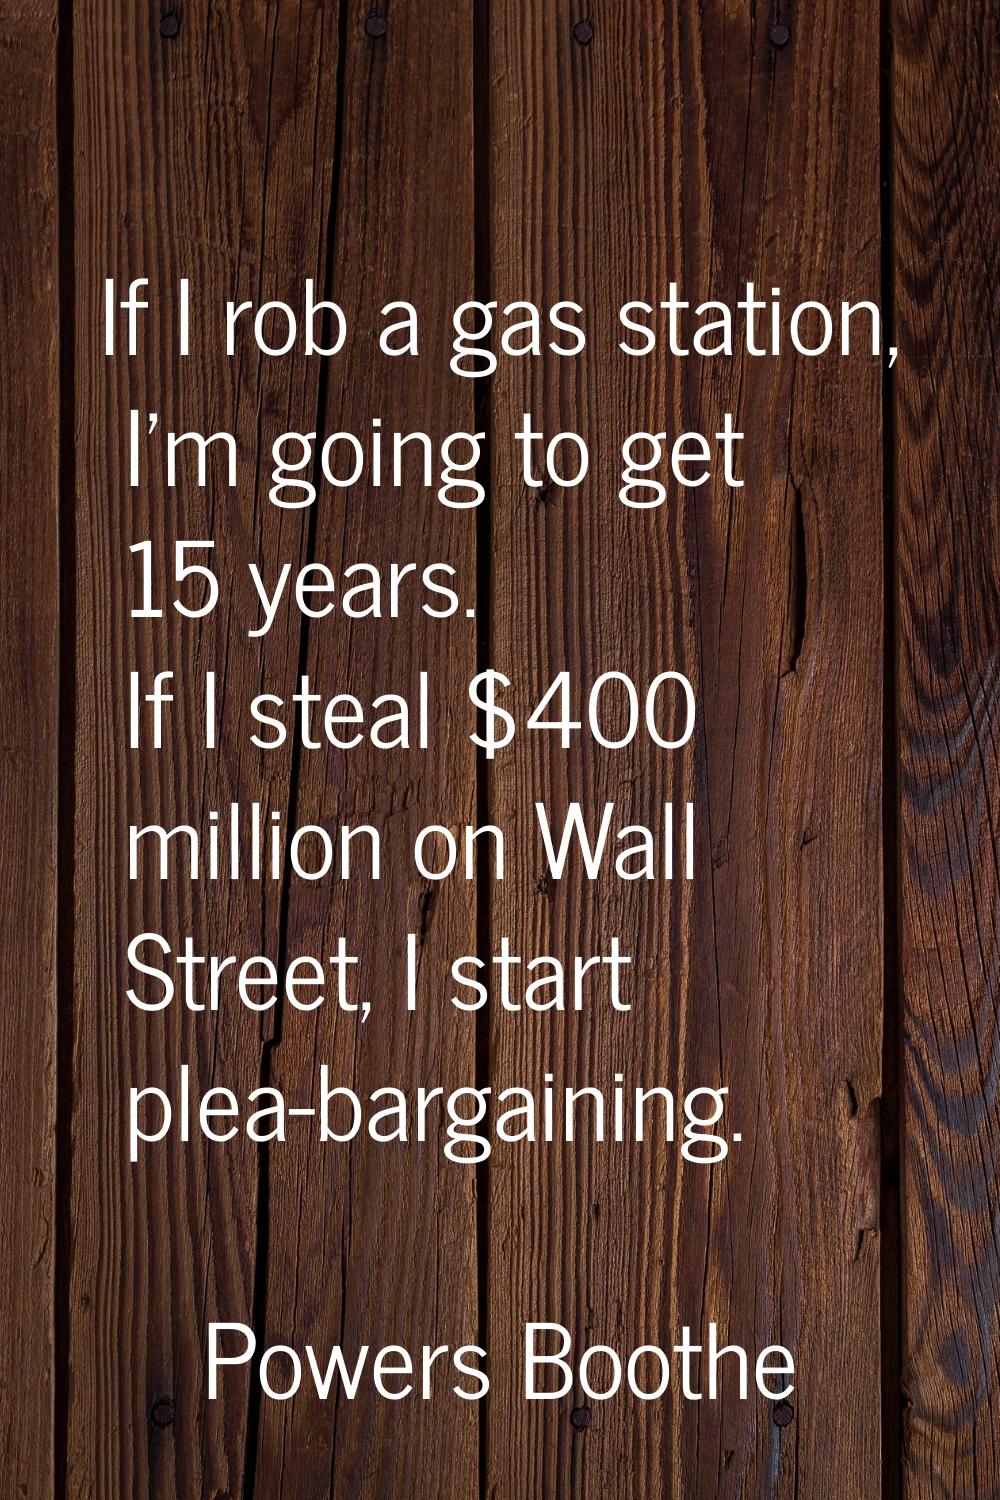 If I rob a gas station, I'm going to get 15 years. If I steal $400 million on Wall Street, I start 